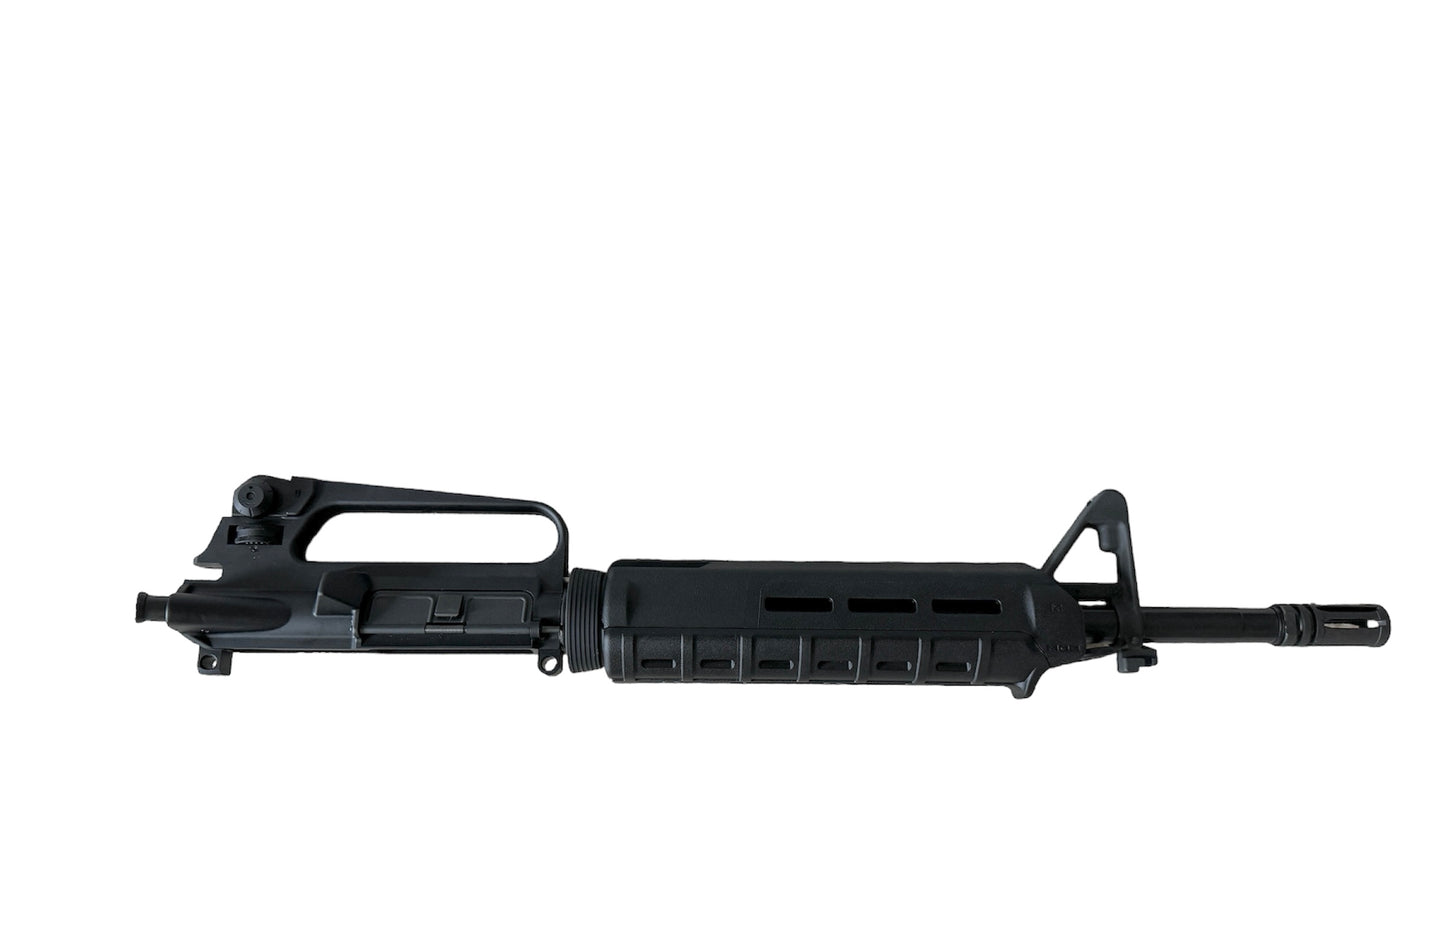 BKF AR15 Retro A2 Carry Handle 14.5″ with Extended A2 Flash Hider Complete Upper Receiver